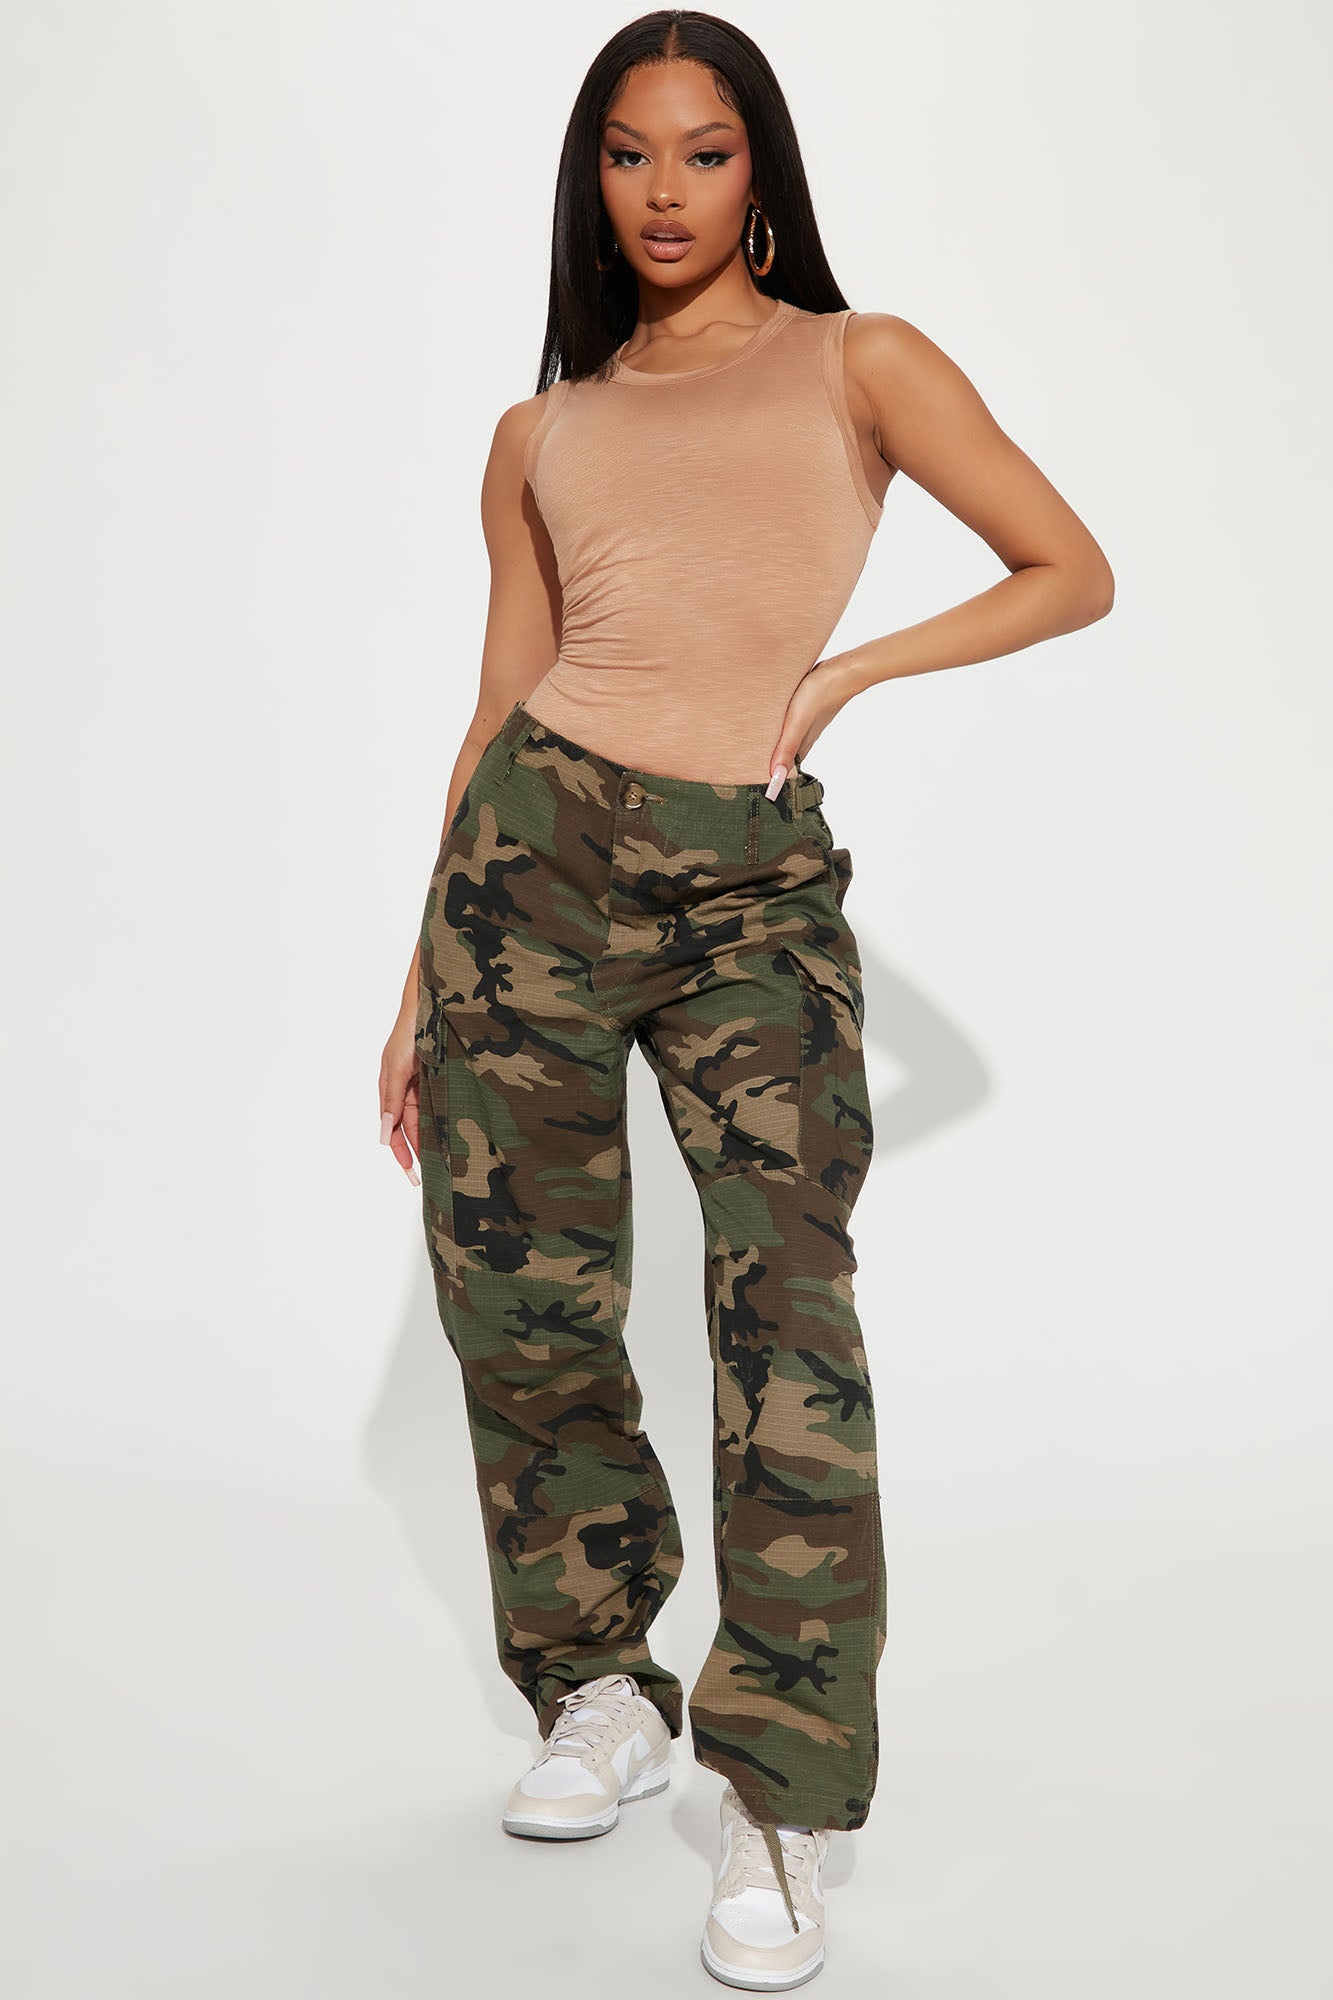 WDIRARA Womens Camo Print Cargo Baggy Jeans High Waist Wide Leg Denim Army  Pants Army Green Camouflage XS at Amazon Womens Jeans store